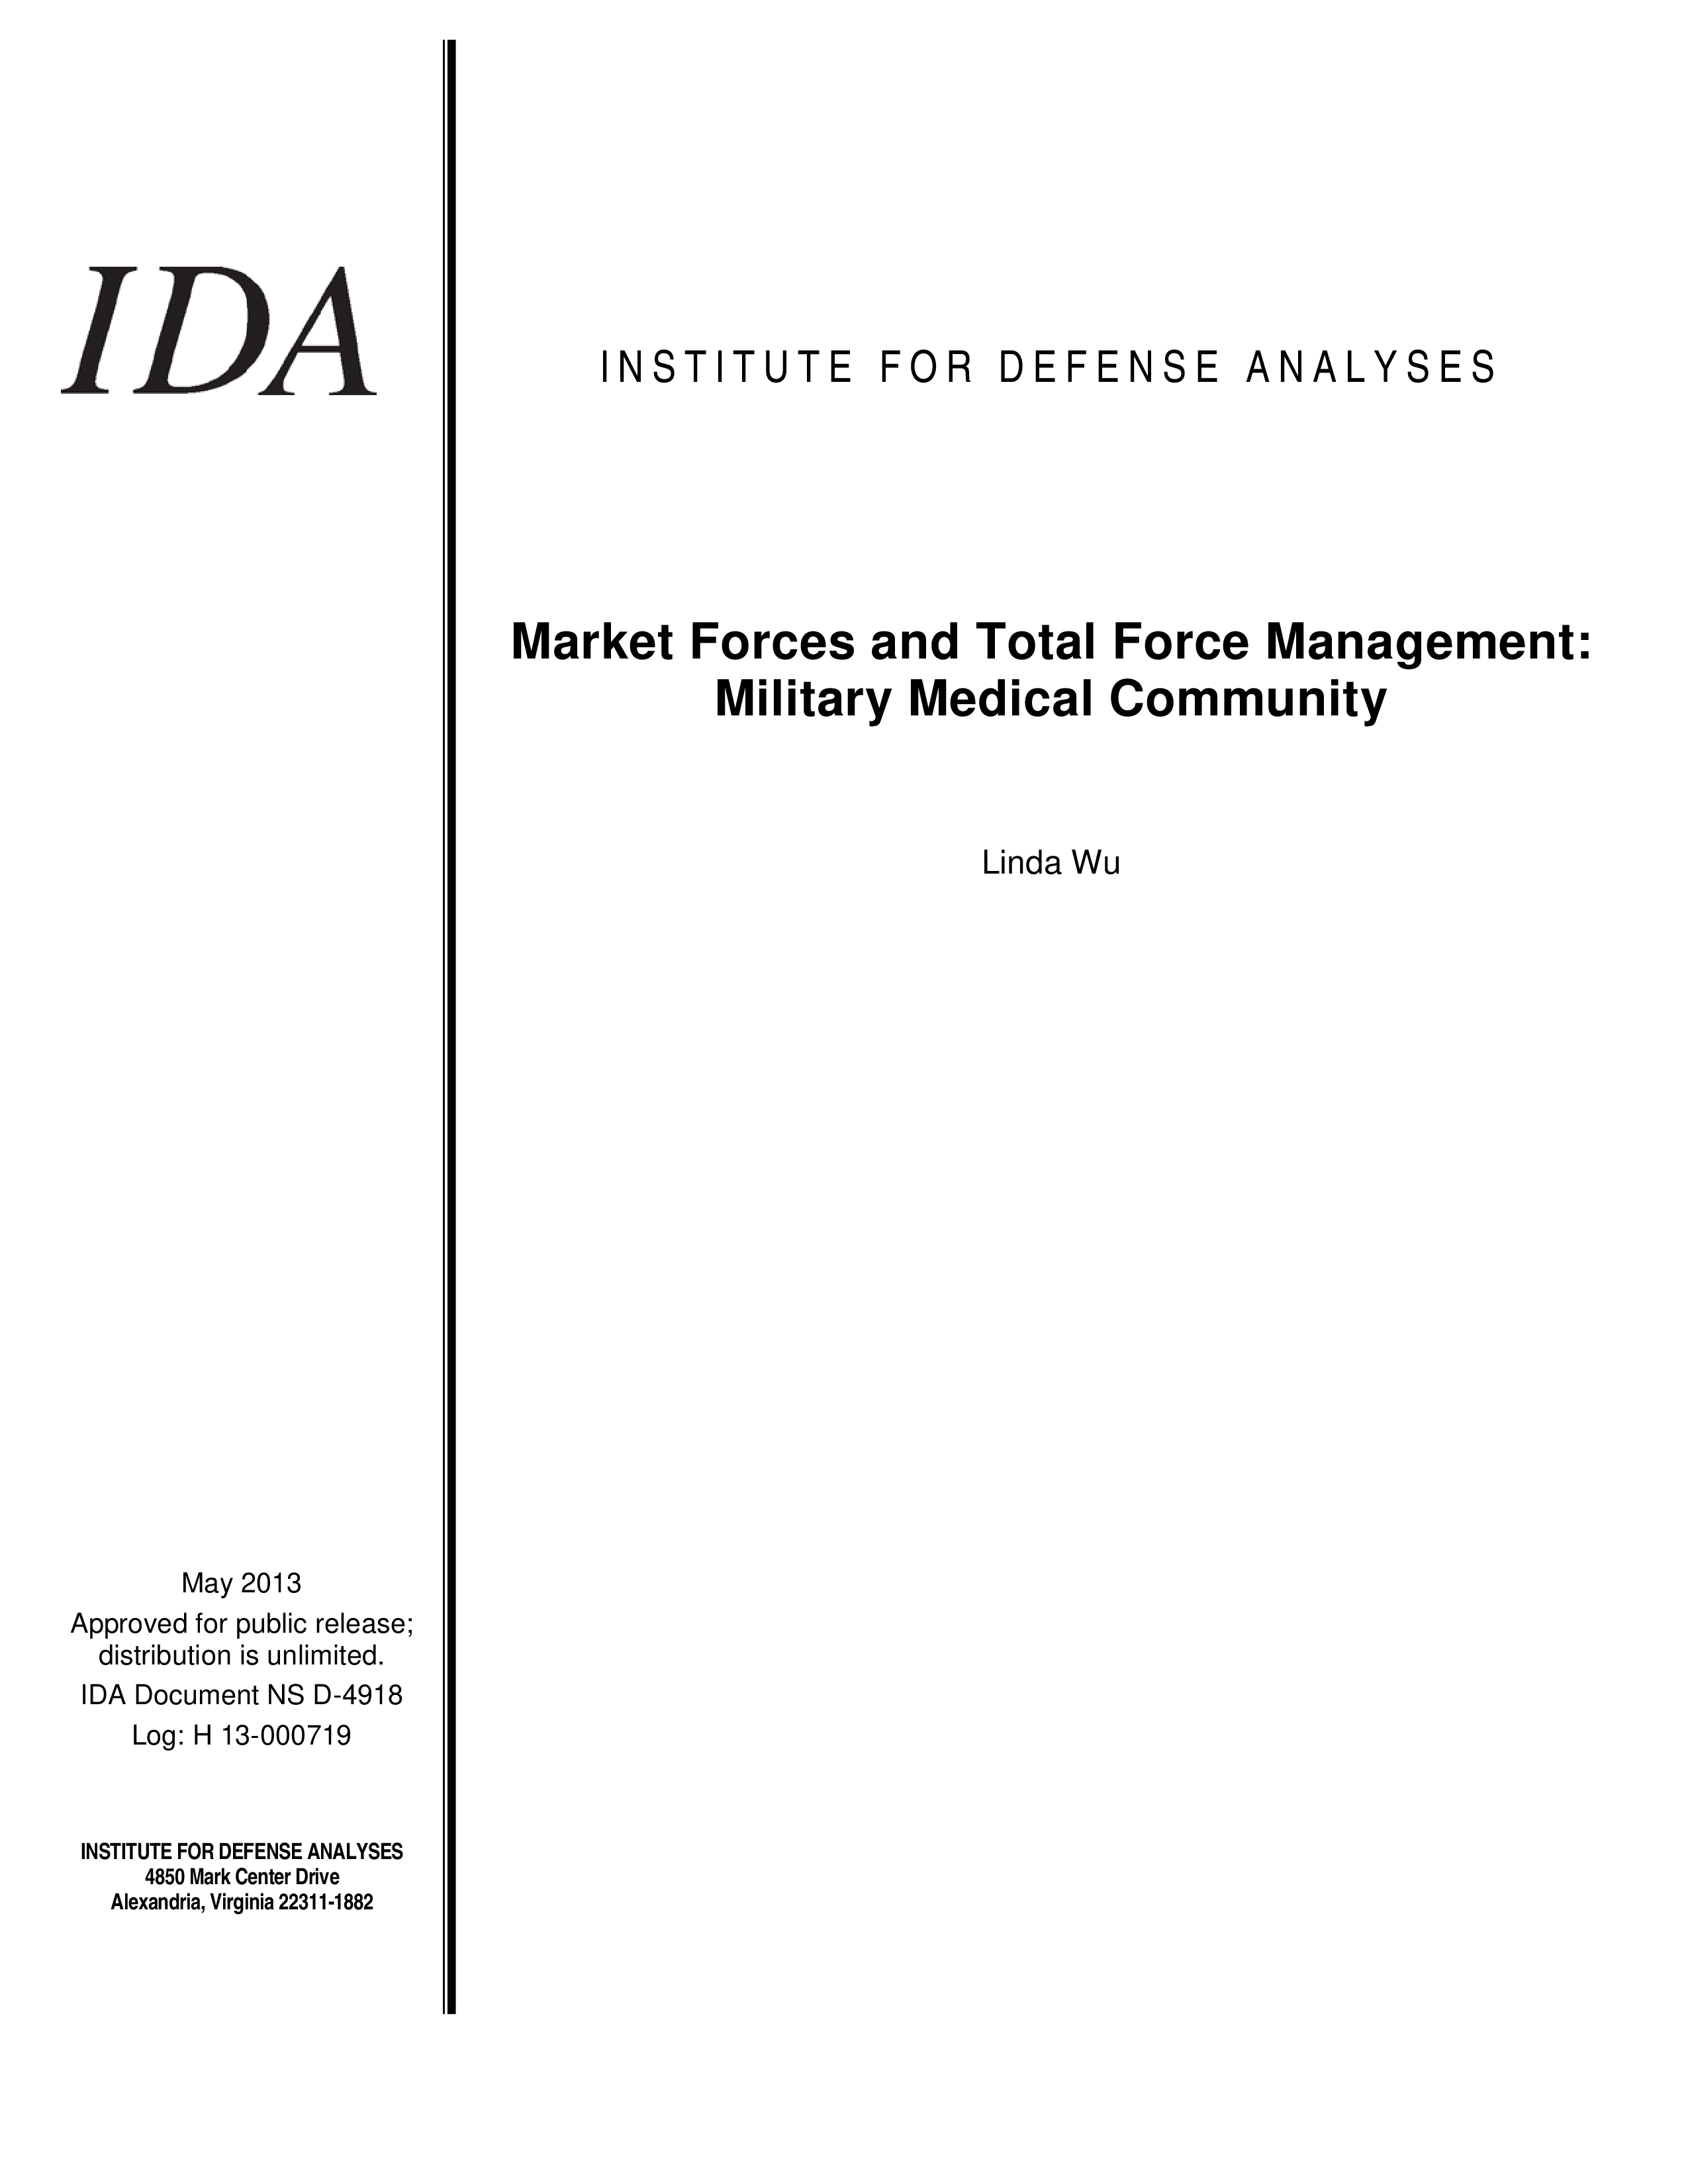 Market Forces and Total Force Management: Military Medical Community 